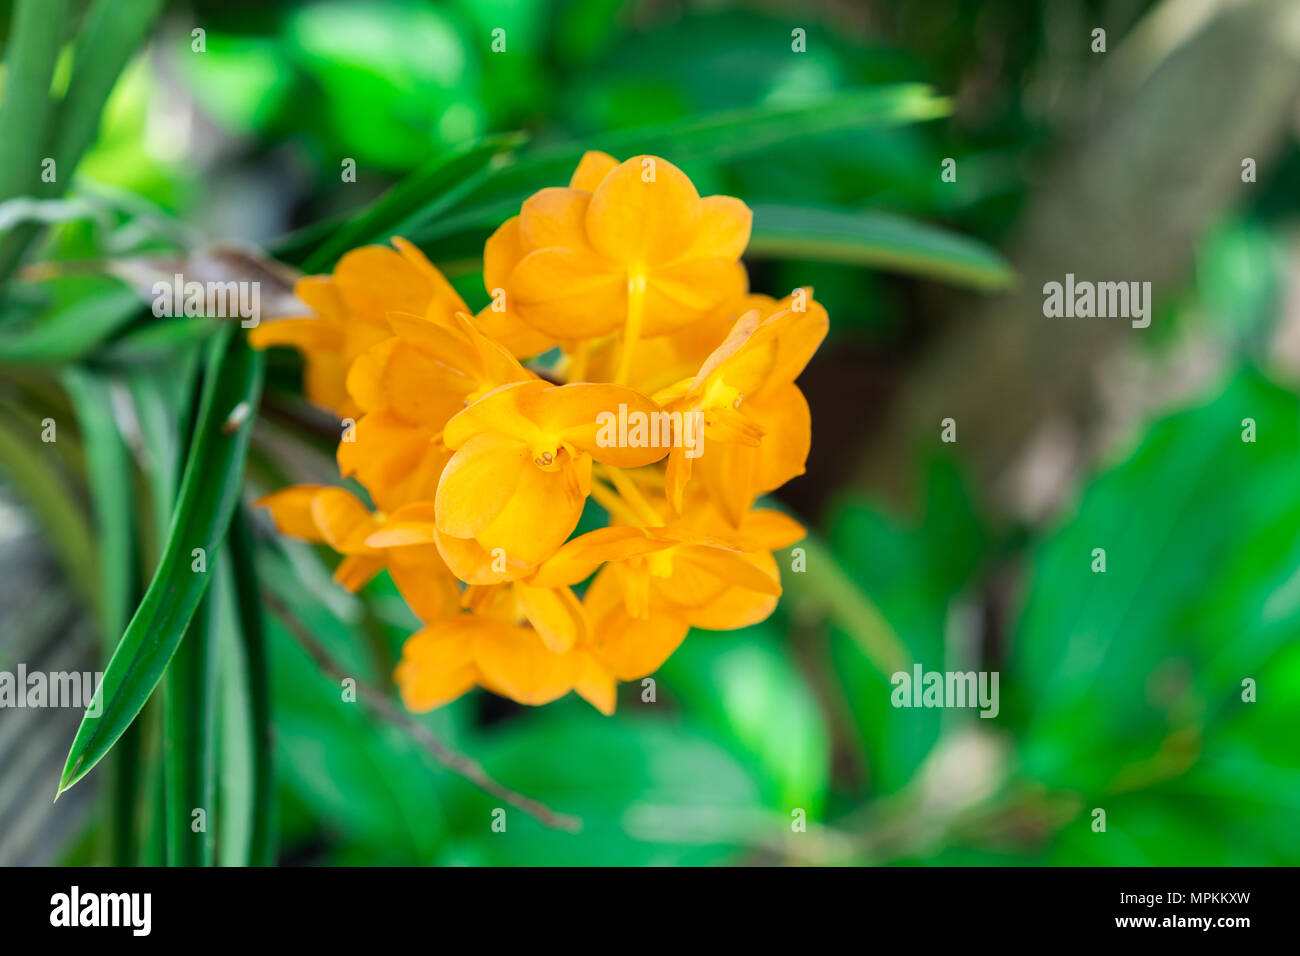 yellow orchid with leaf in a plant Stock Photo